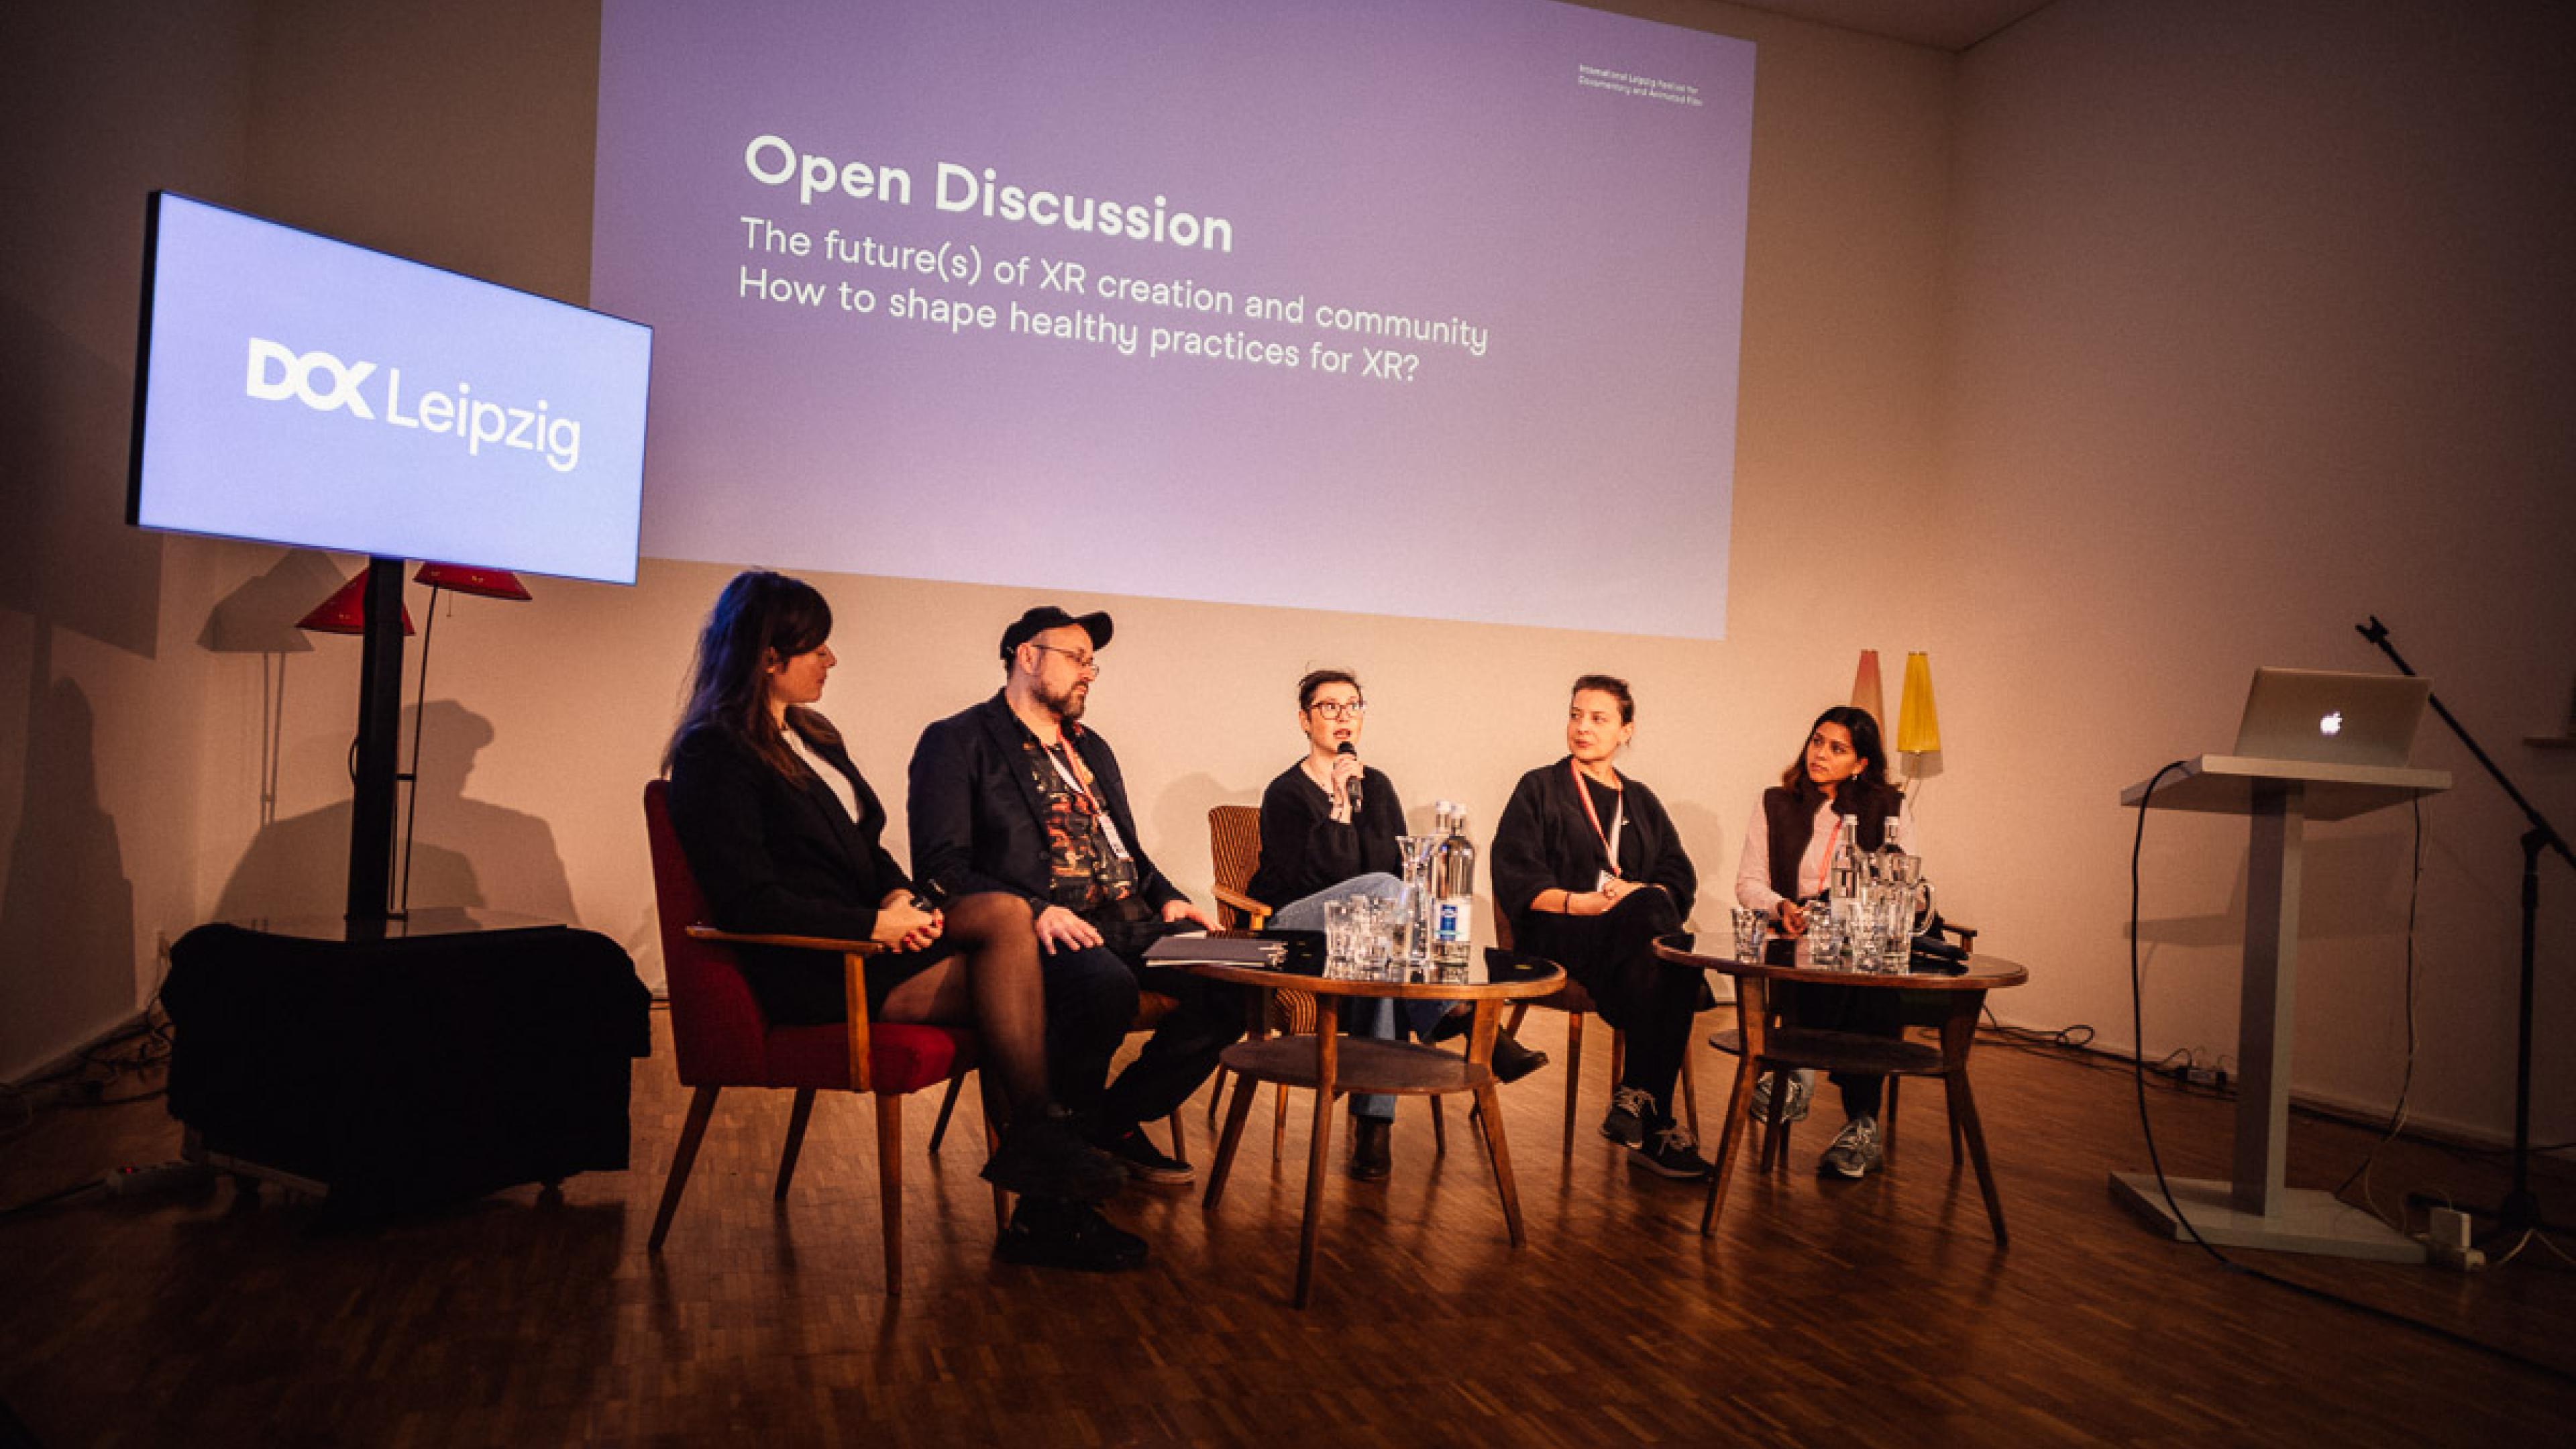 Five persons are sitting on sofa chairs on a discussion panel. The woman in the middle is talking into a microphone. In the background a blue info graphic is projected on the wall. It says: "Open discussion. The future(s) of XR creation and community."